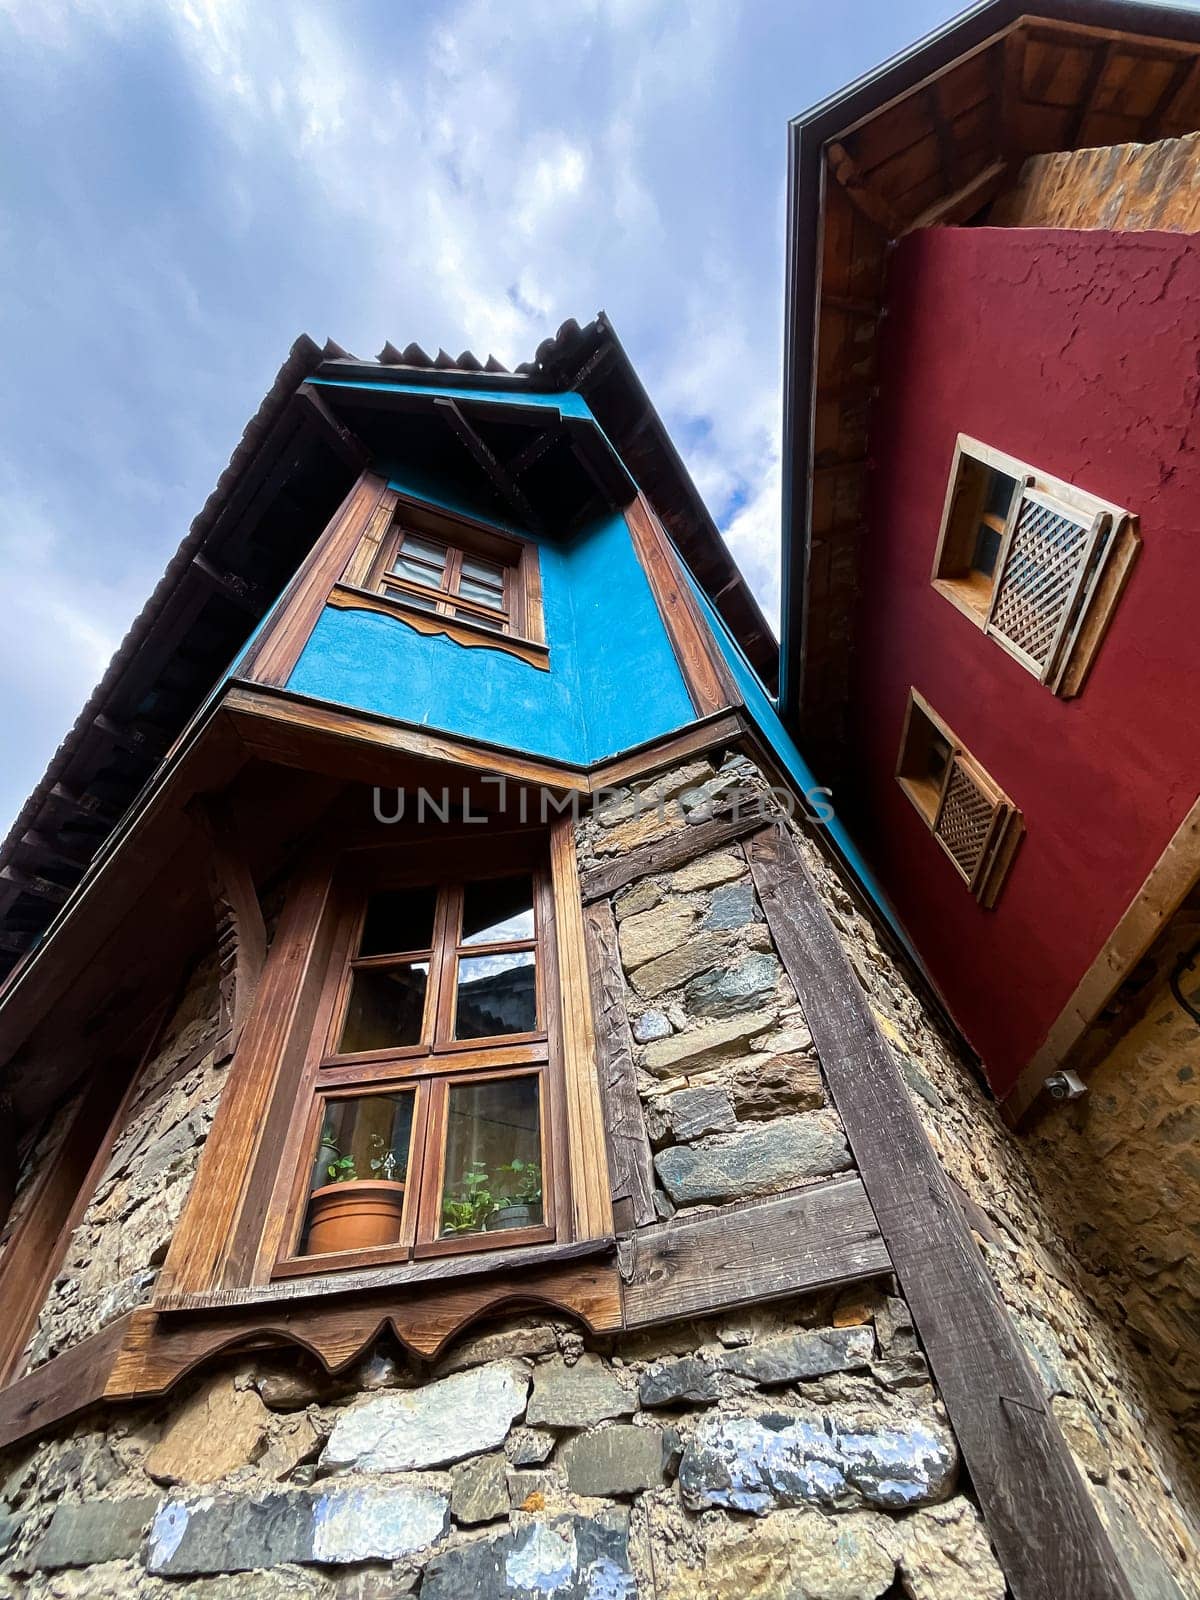 Traditional Ottoman house in blue and red. Old Ottoman village, UNESCO World Heritage Site. Old wooden mansion of Turkish architecture. Wooden Ottoman mansion